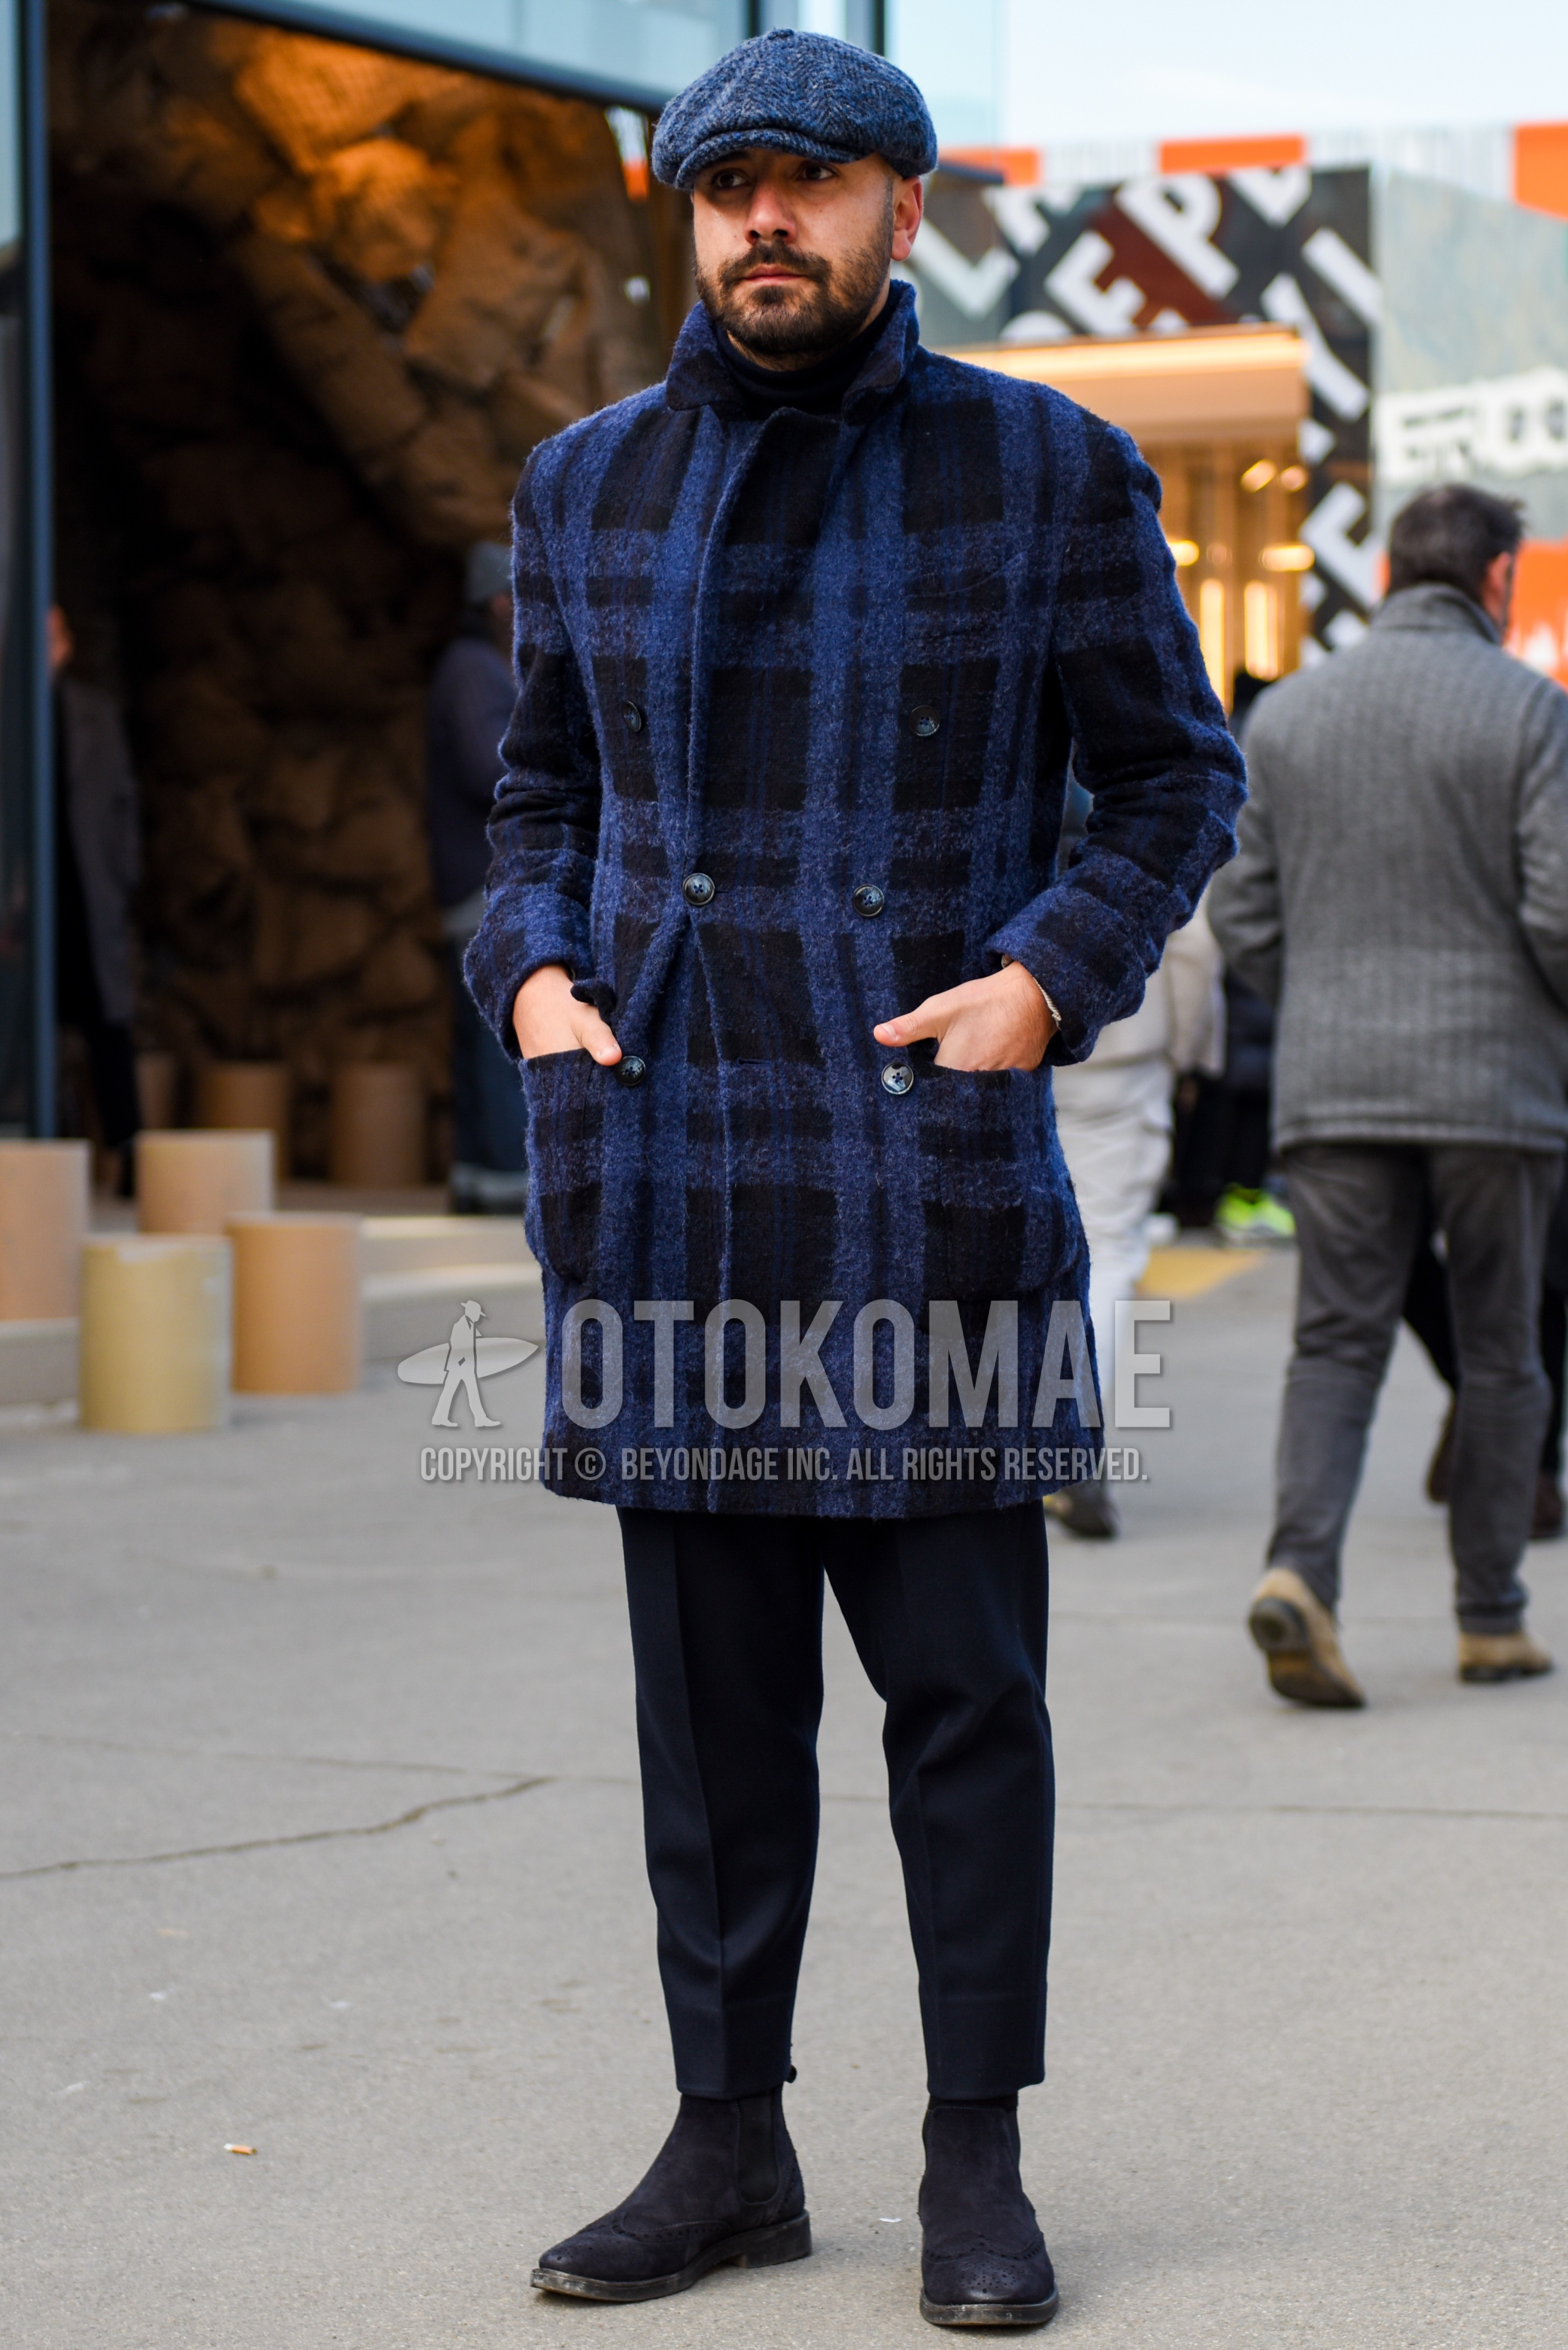 Men's autumn winter outfit with blue herringbone hunting cap, blue black check chester coat, navy plain slacks, navy plain cropped pants, navy side-gore boots.